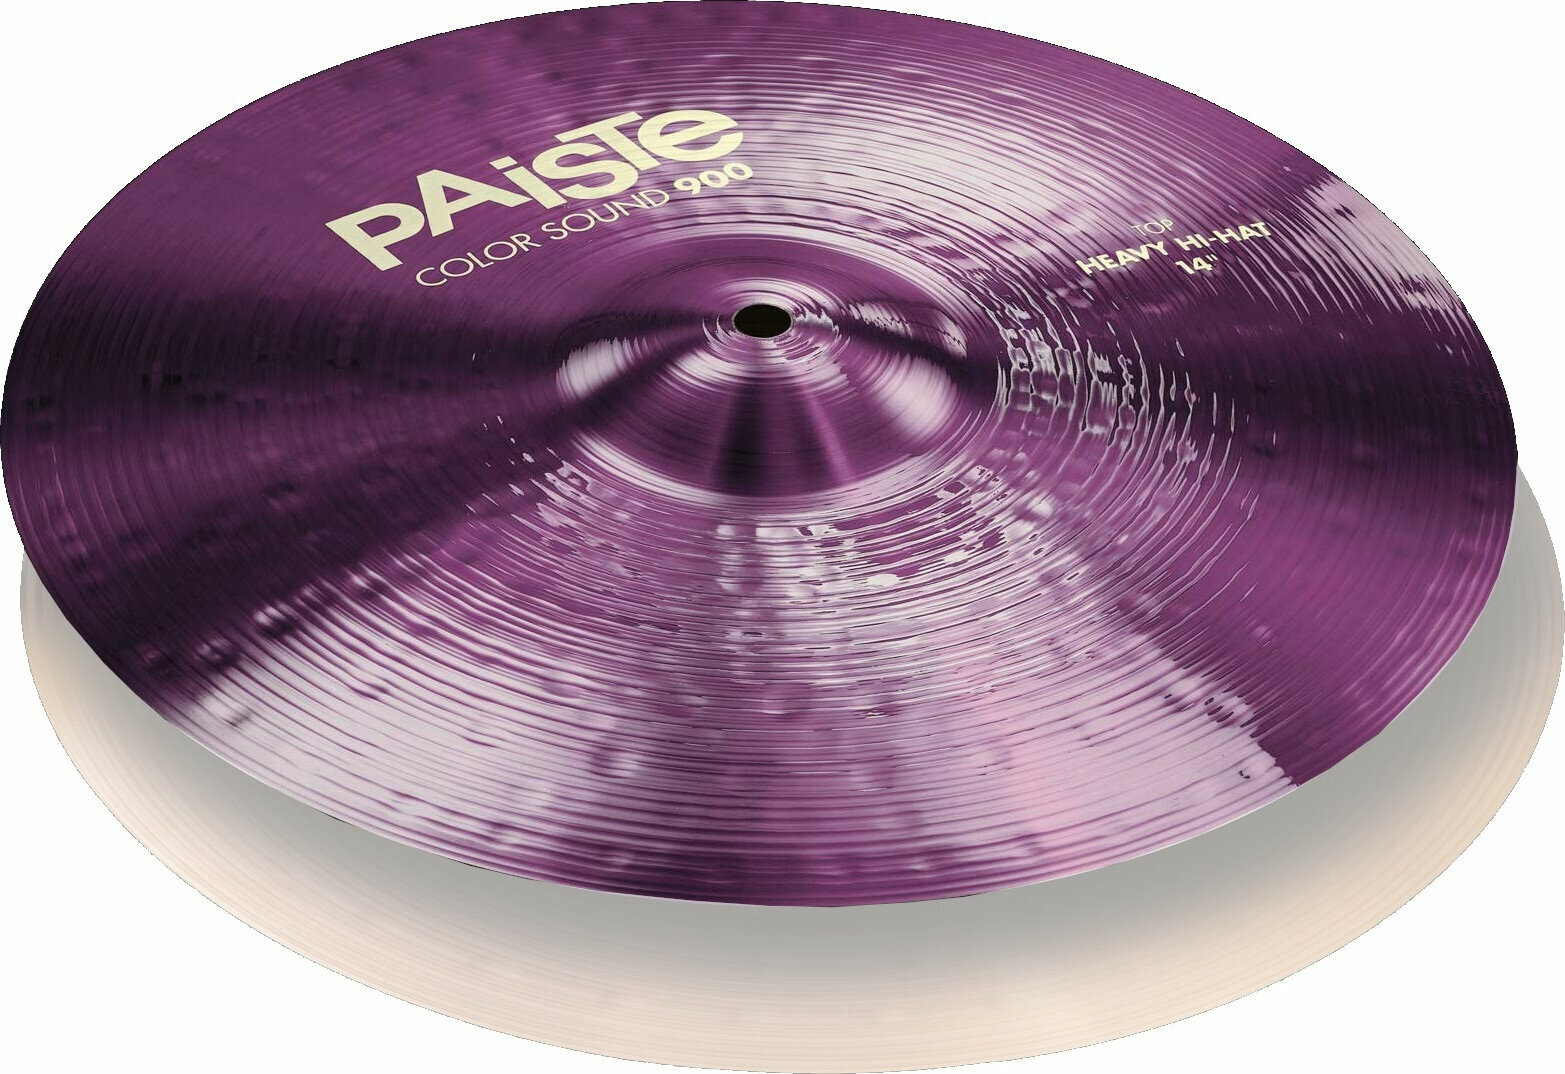 Cymbale charleston Paiste Color Sound 900  Heavy Top Cymbale charleston 15" Violet